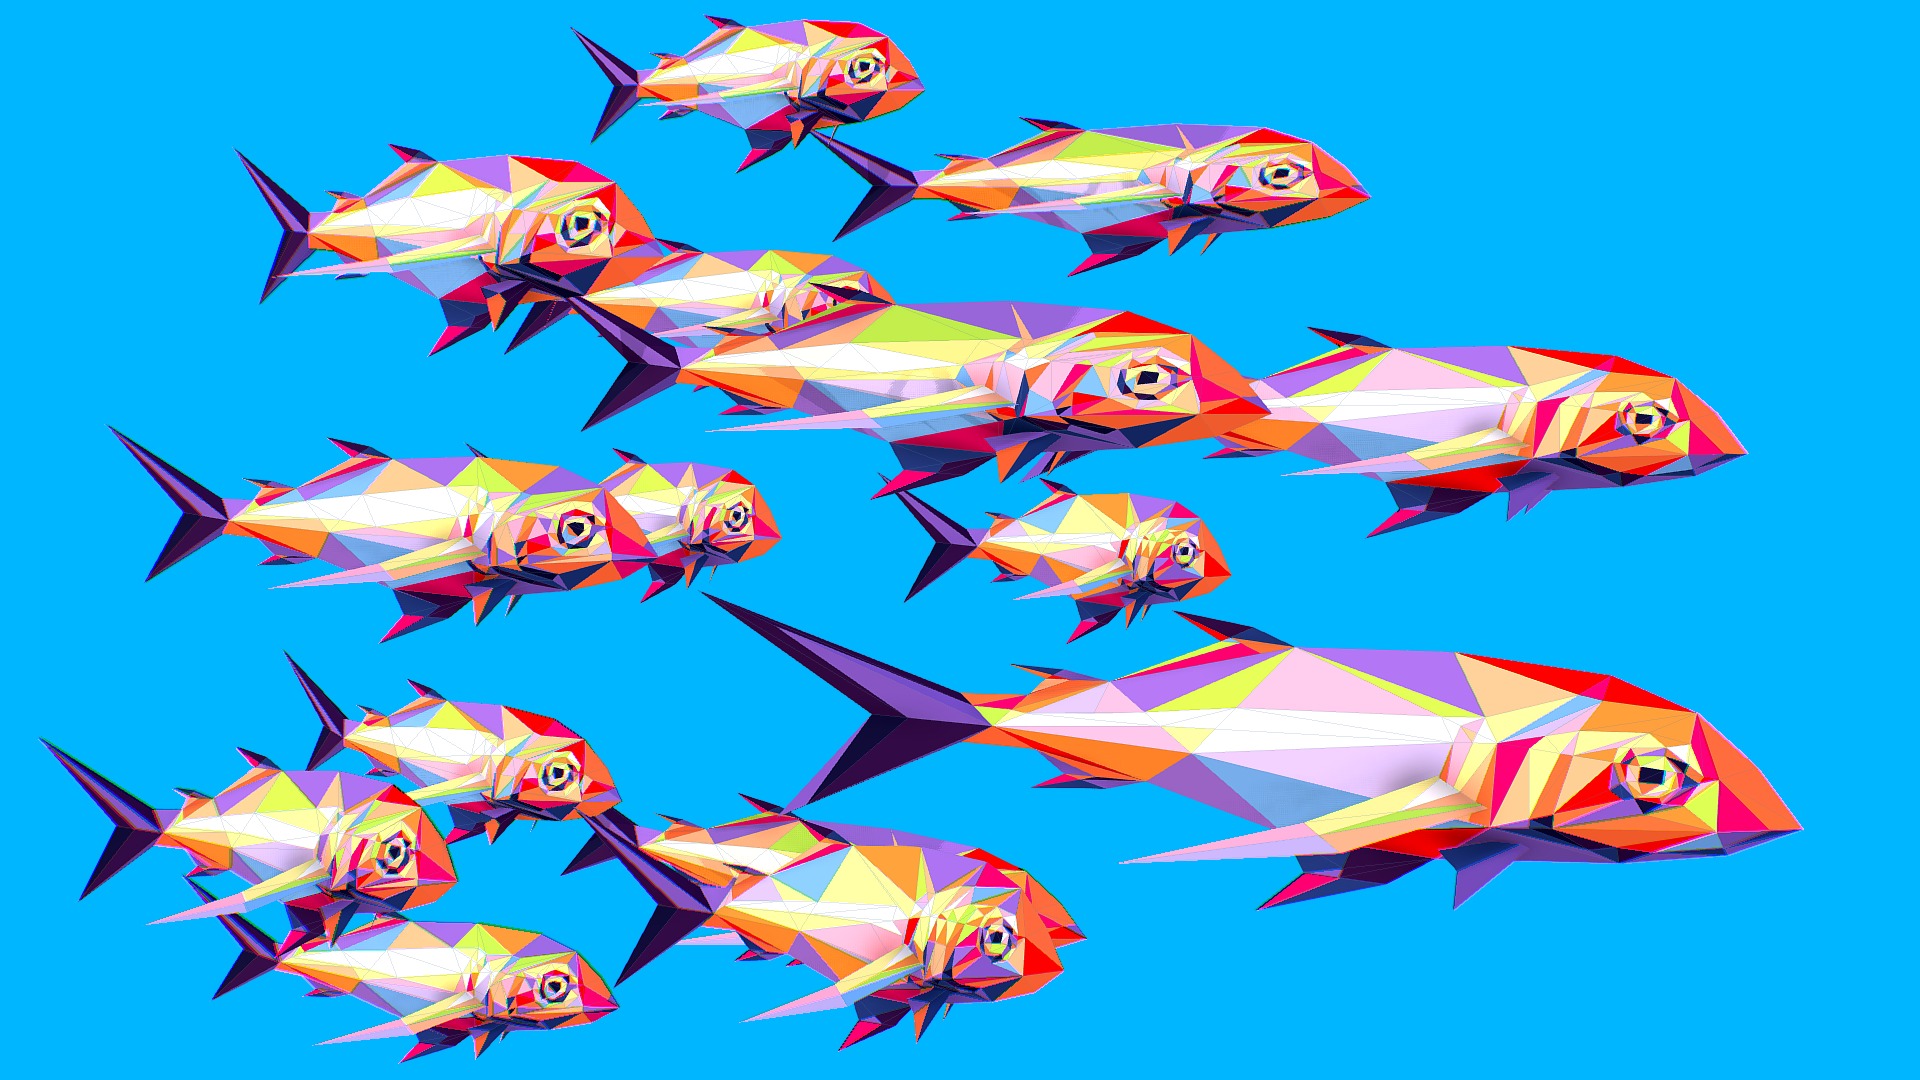 3D model Animated Low Poly Pop Art Flock Sea Fish - This is a 3D model of the Animated Low Poly Pop Art Flock Sea Fish. The 3D model is about a group of colorful fish.